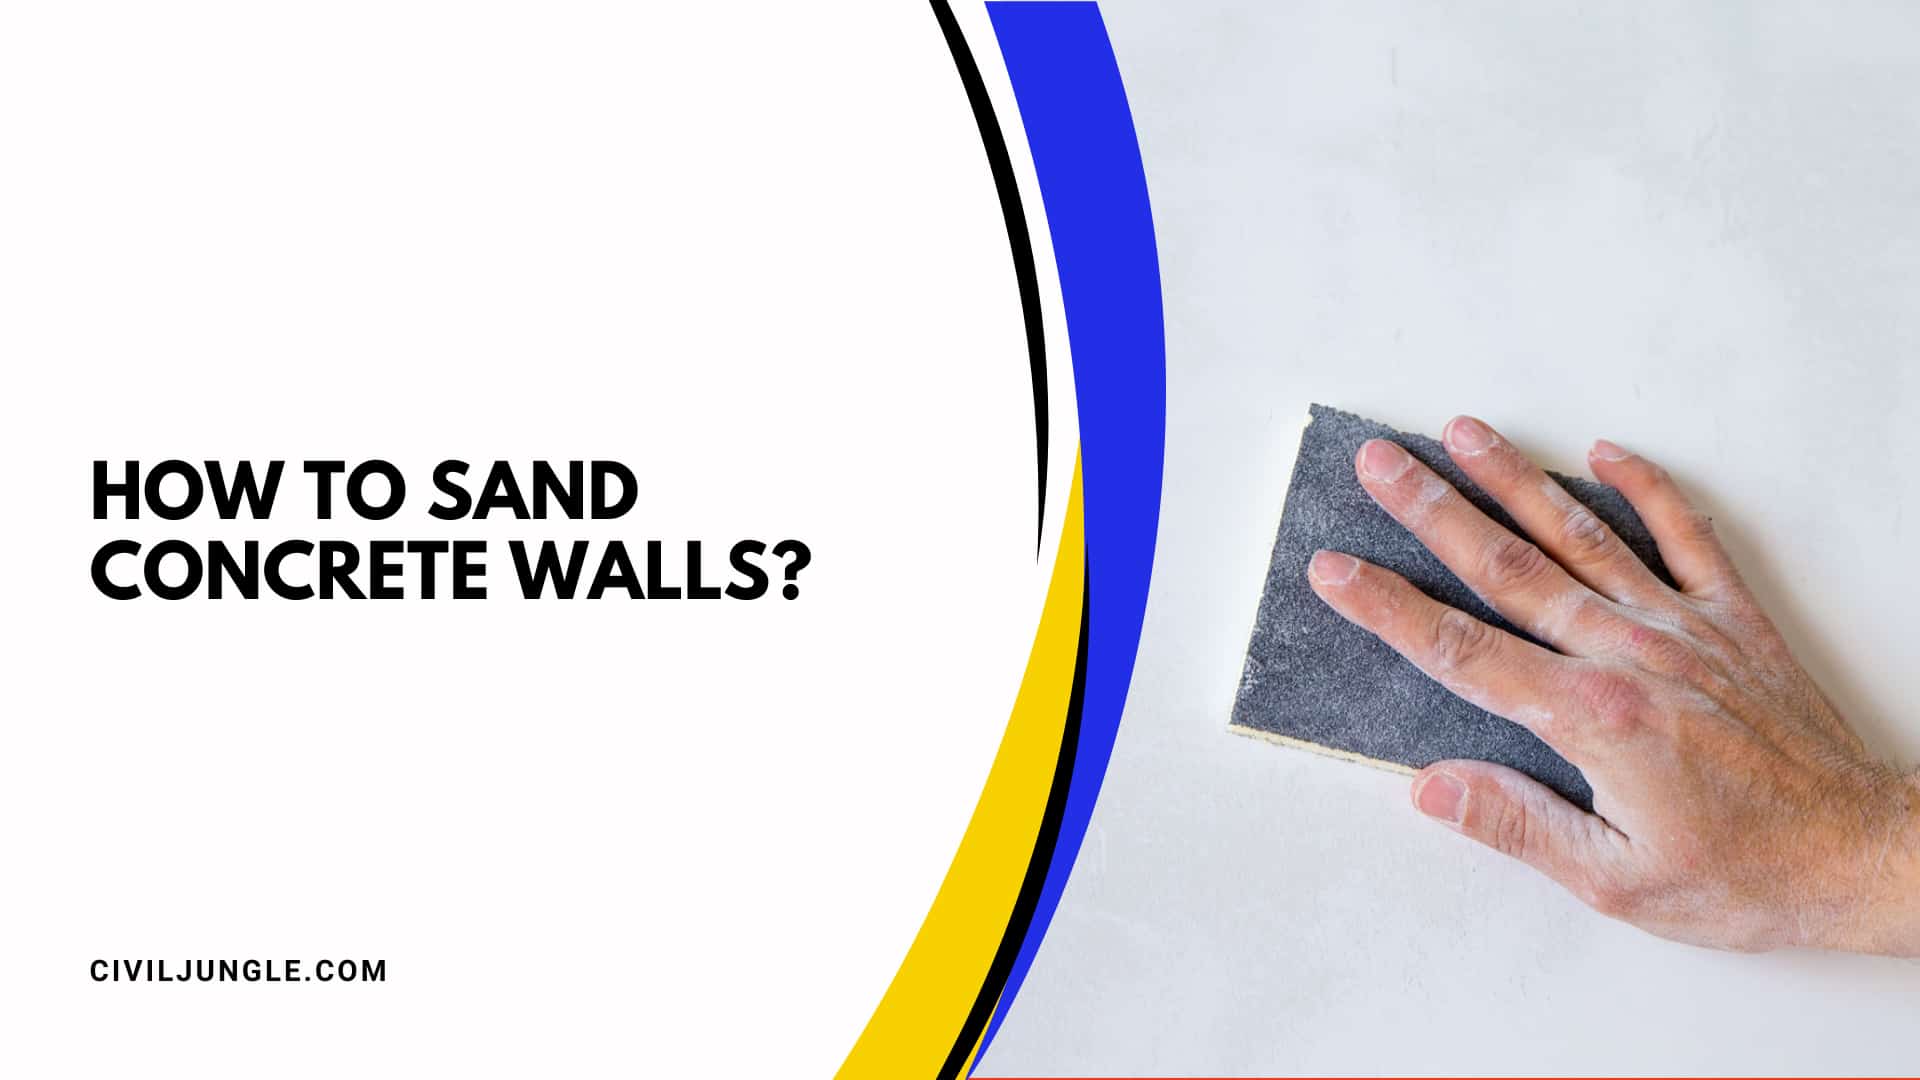 How To Sand Concrete Walls?